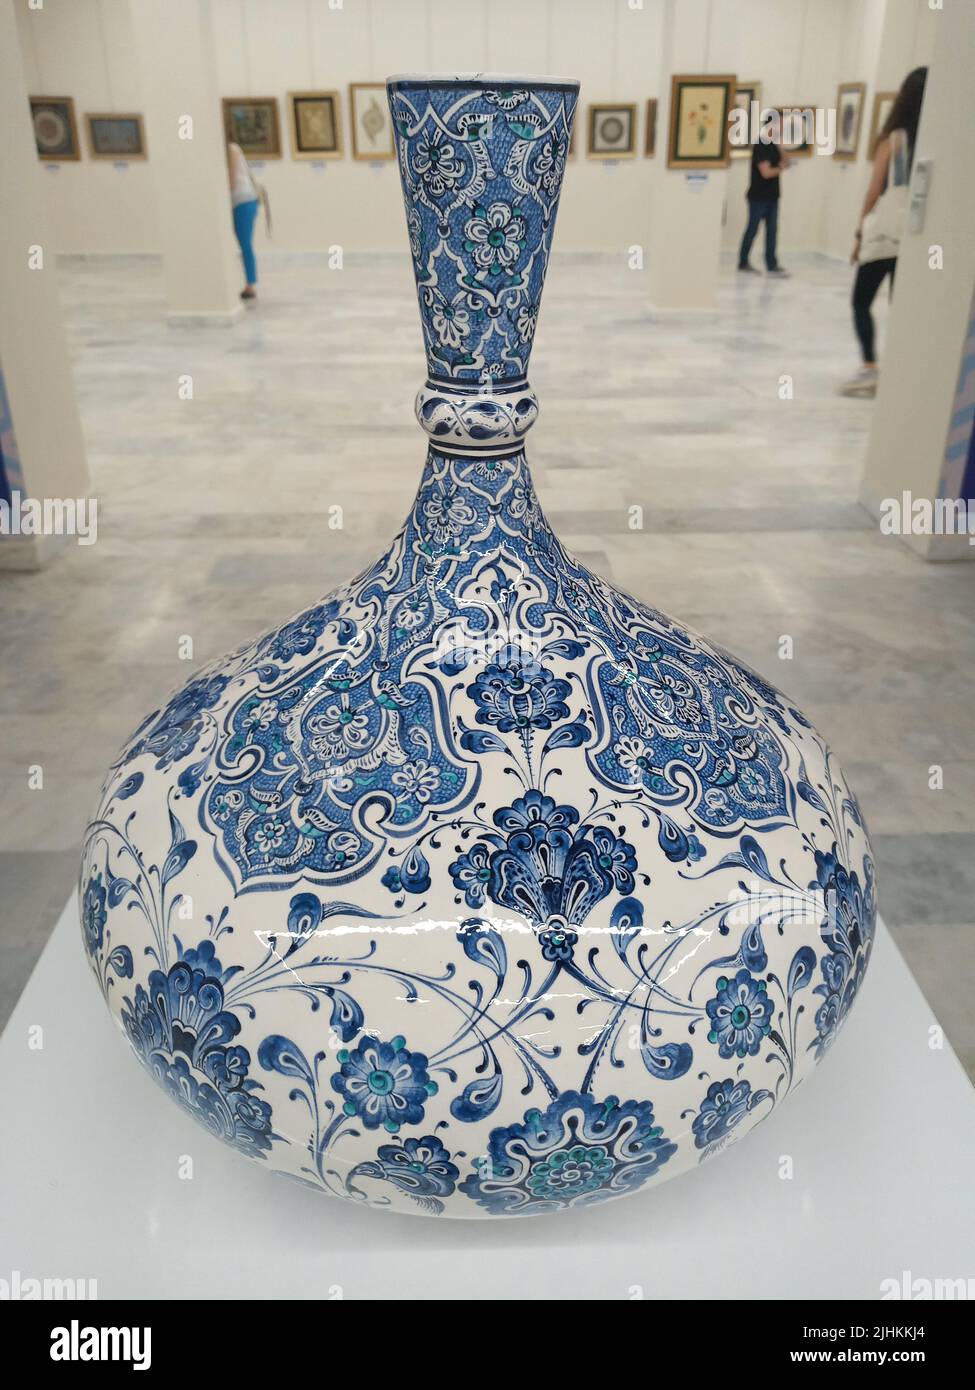 Ankara, Türkiye – June 5, 2022: Ceramics exhibited at the State Painting and Sculpture Museum as part of the Festival. Stock Photo